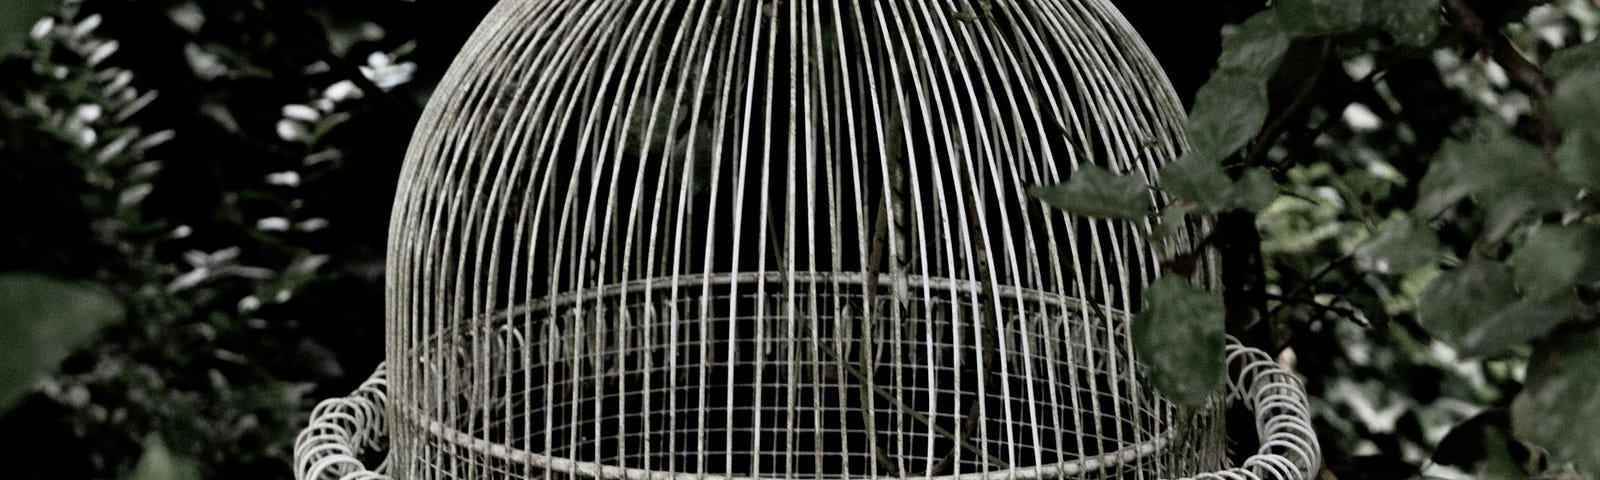 Here is a photo of a birdcage with the door open, representing our fears of stepping outside and flying, expanding our lives, and finding fulfillment when we risk taking flight.